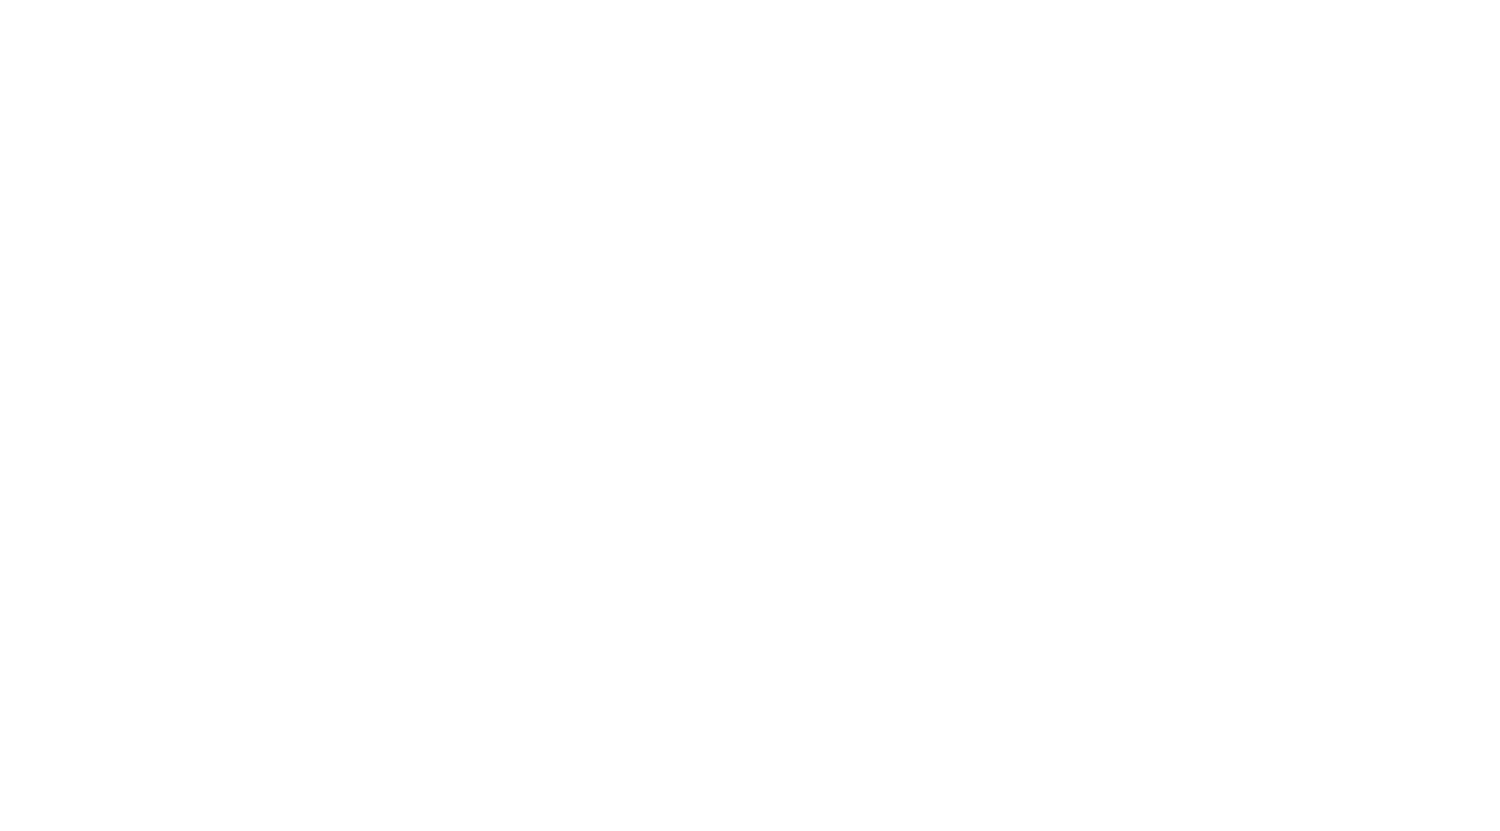 Monte Carlos, Great and Small